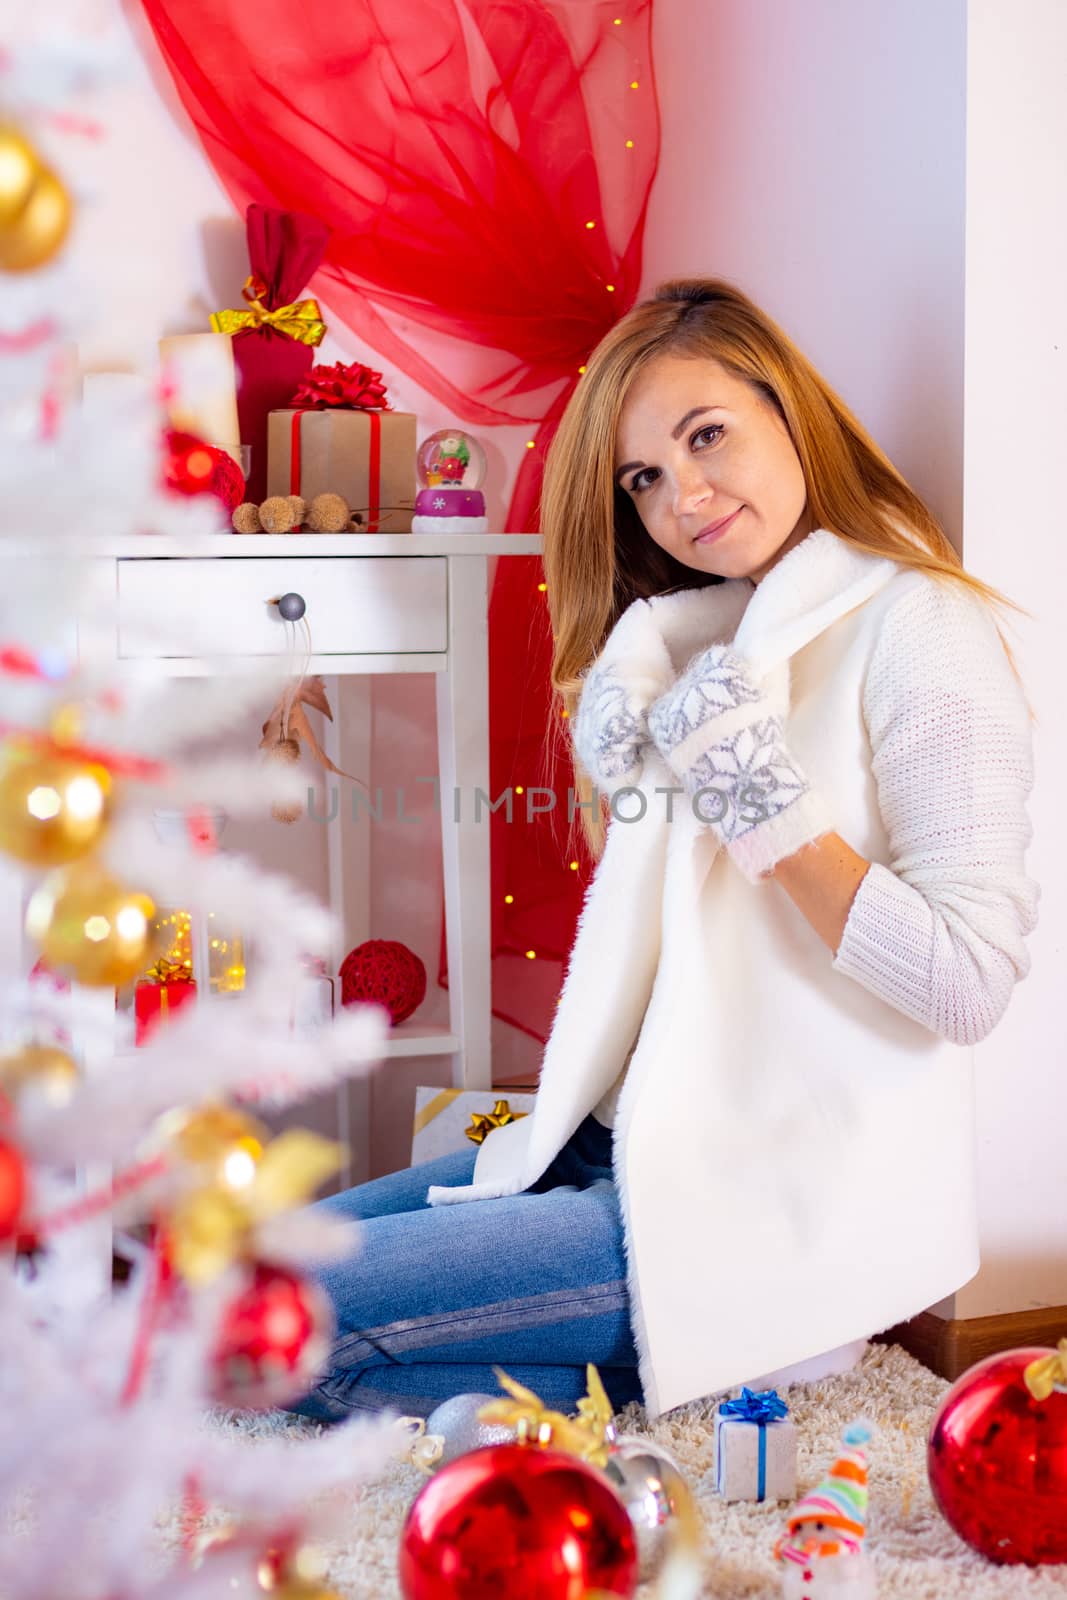 Girl in warm flea clothes in the New Year's interior